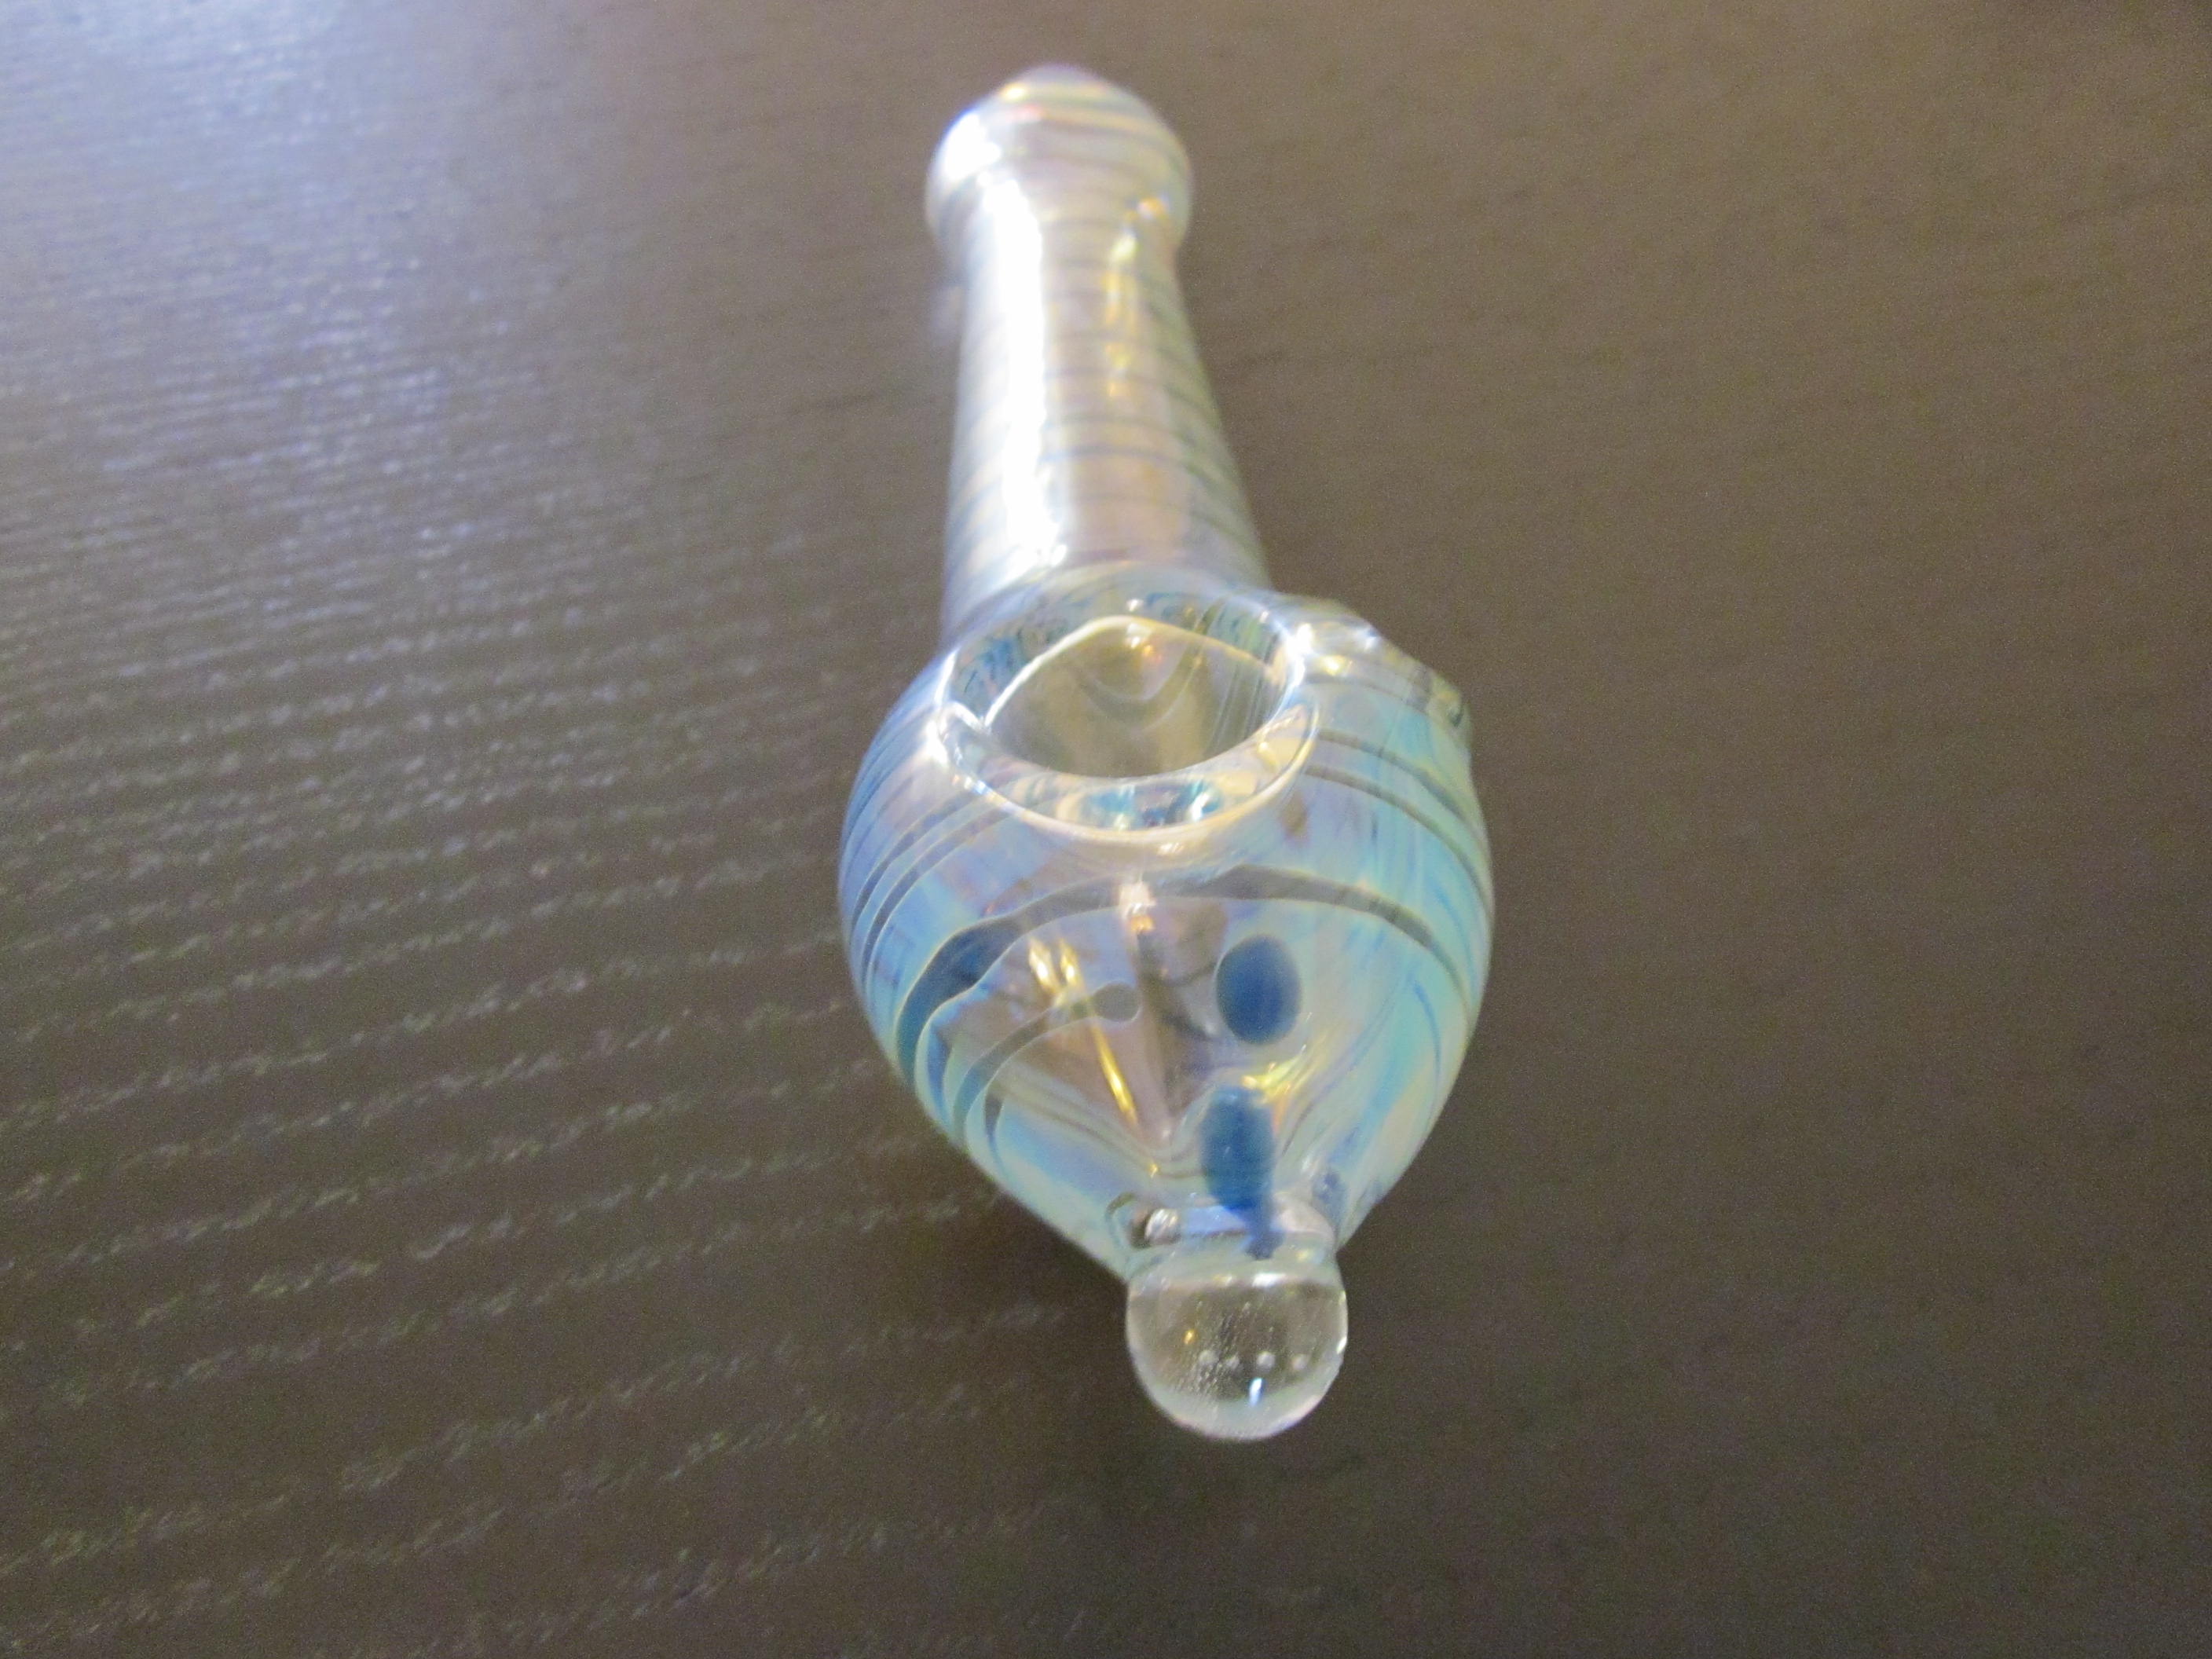 New Shape Smoking Glass Weed Pipes For Happy Stoners